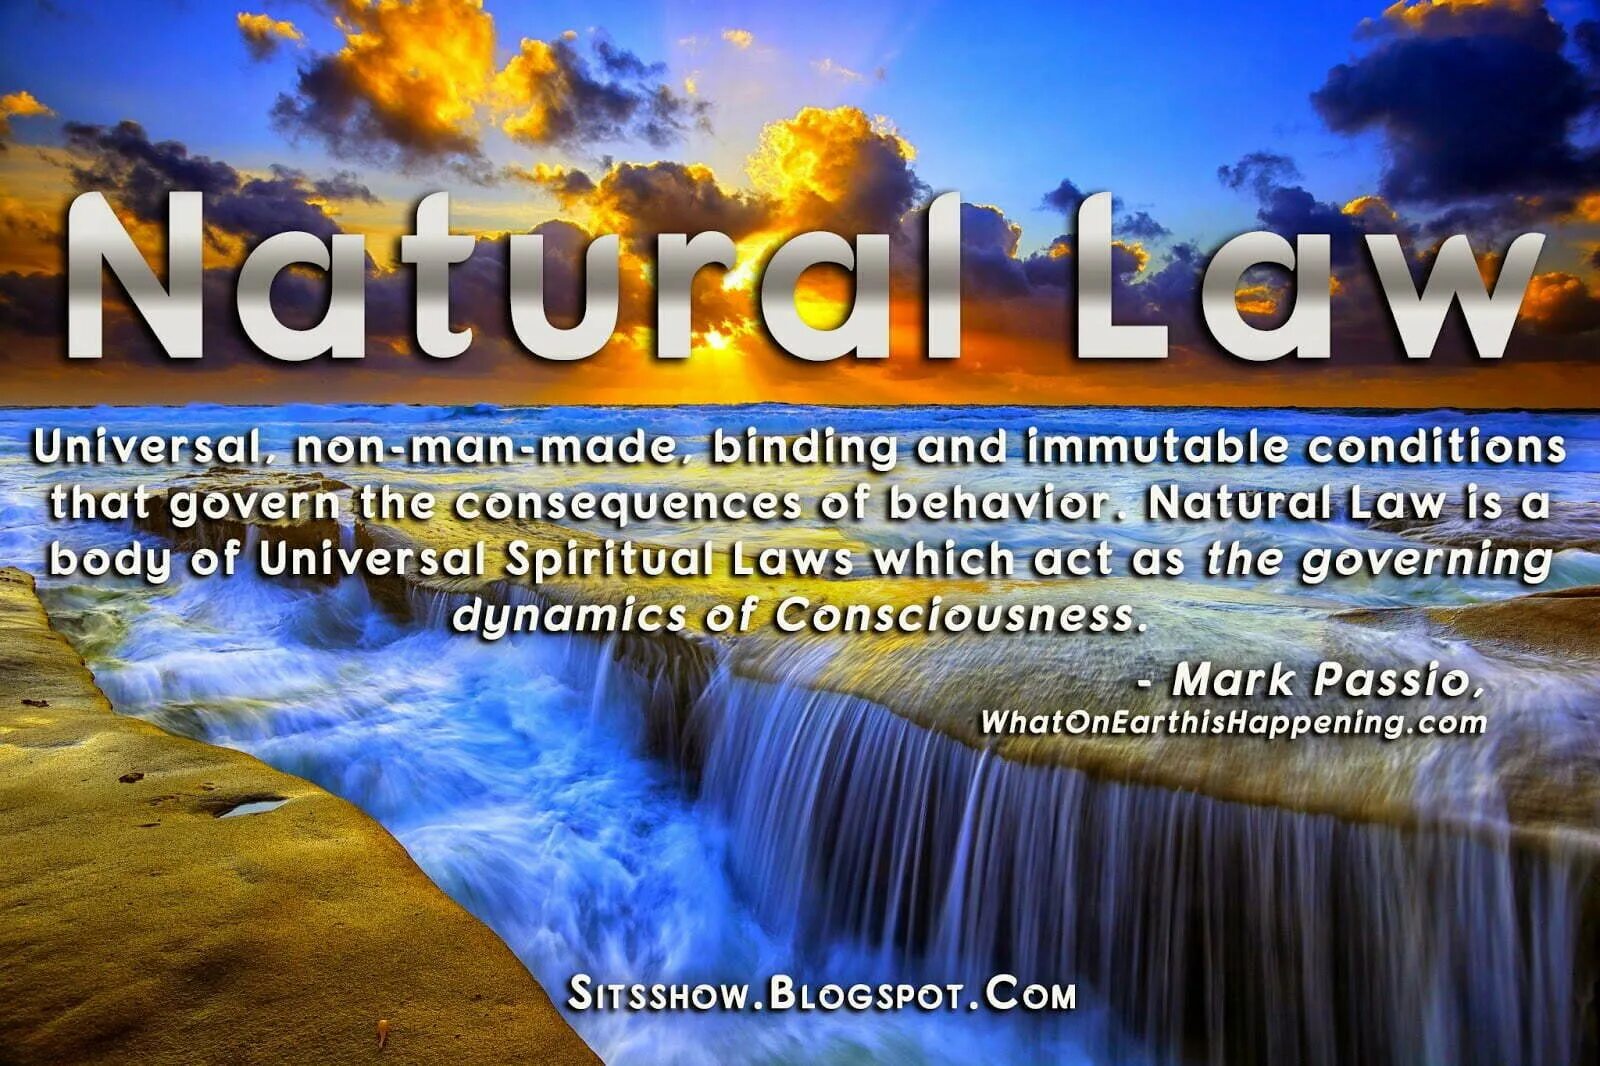 Natural law. Laws of nature. Mark Passio. Natural Law and natural rights. Law of nature Rush.